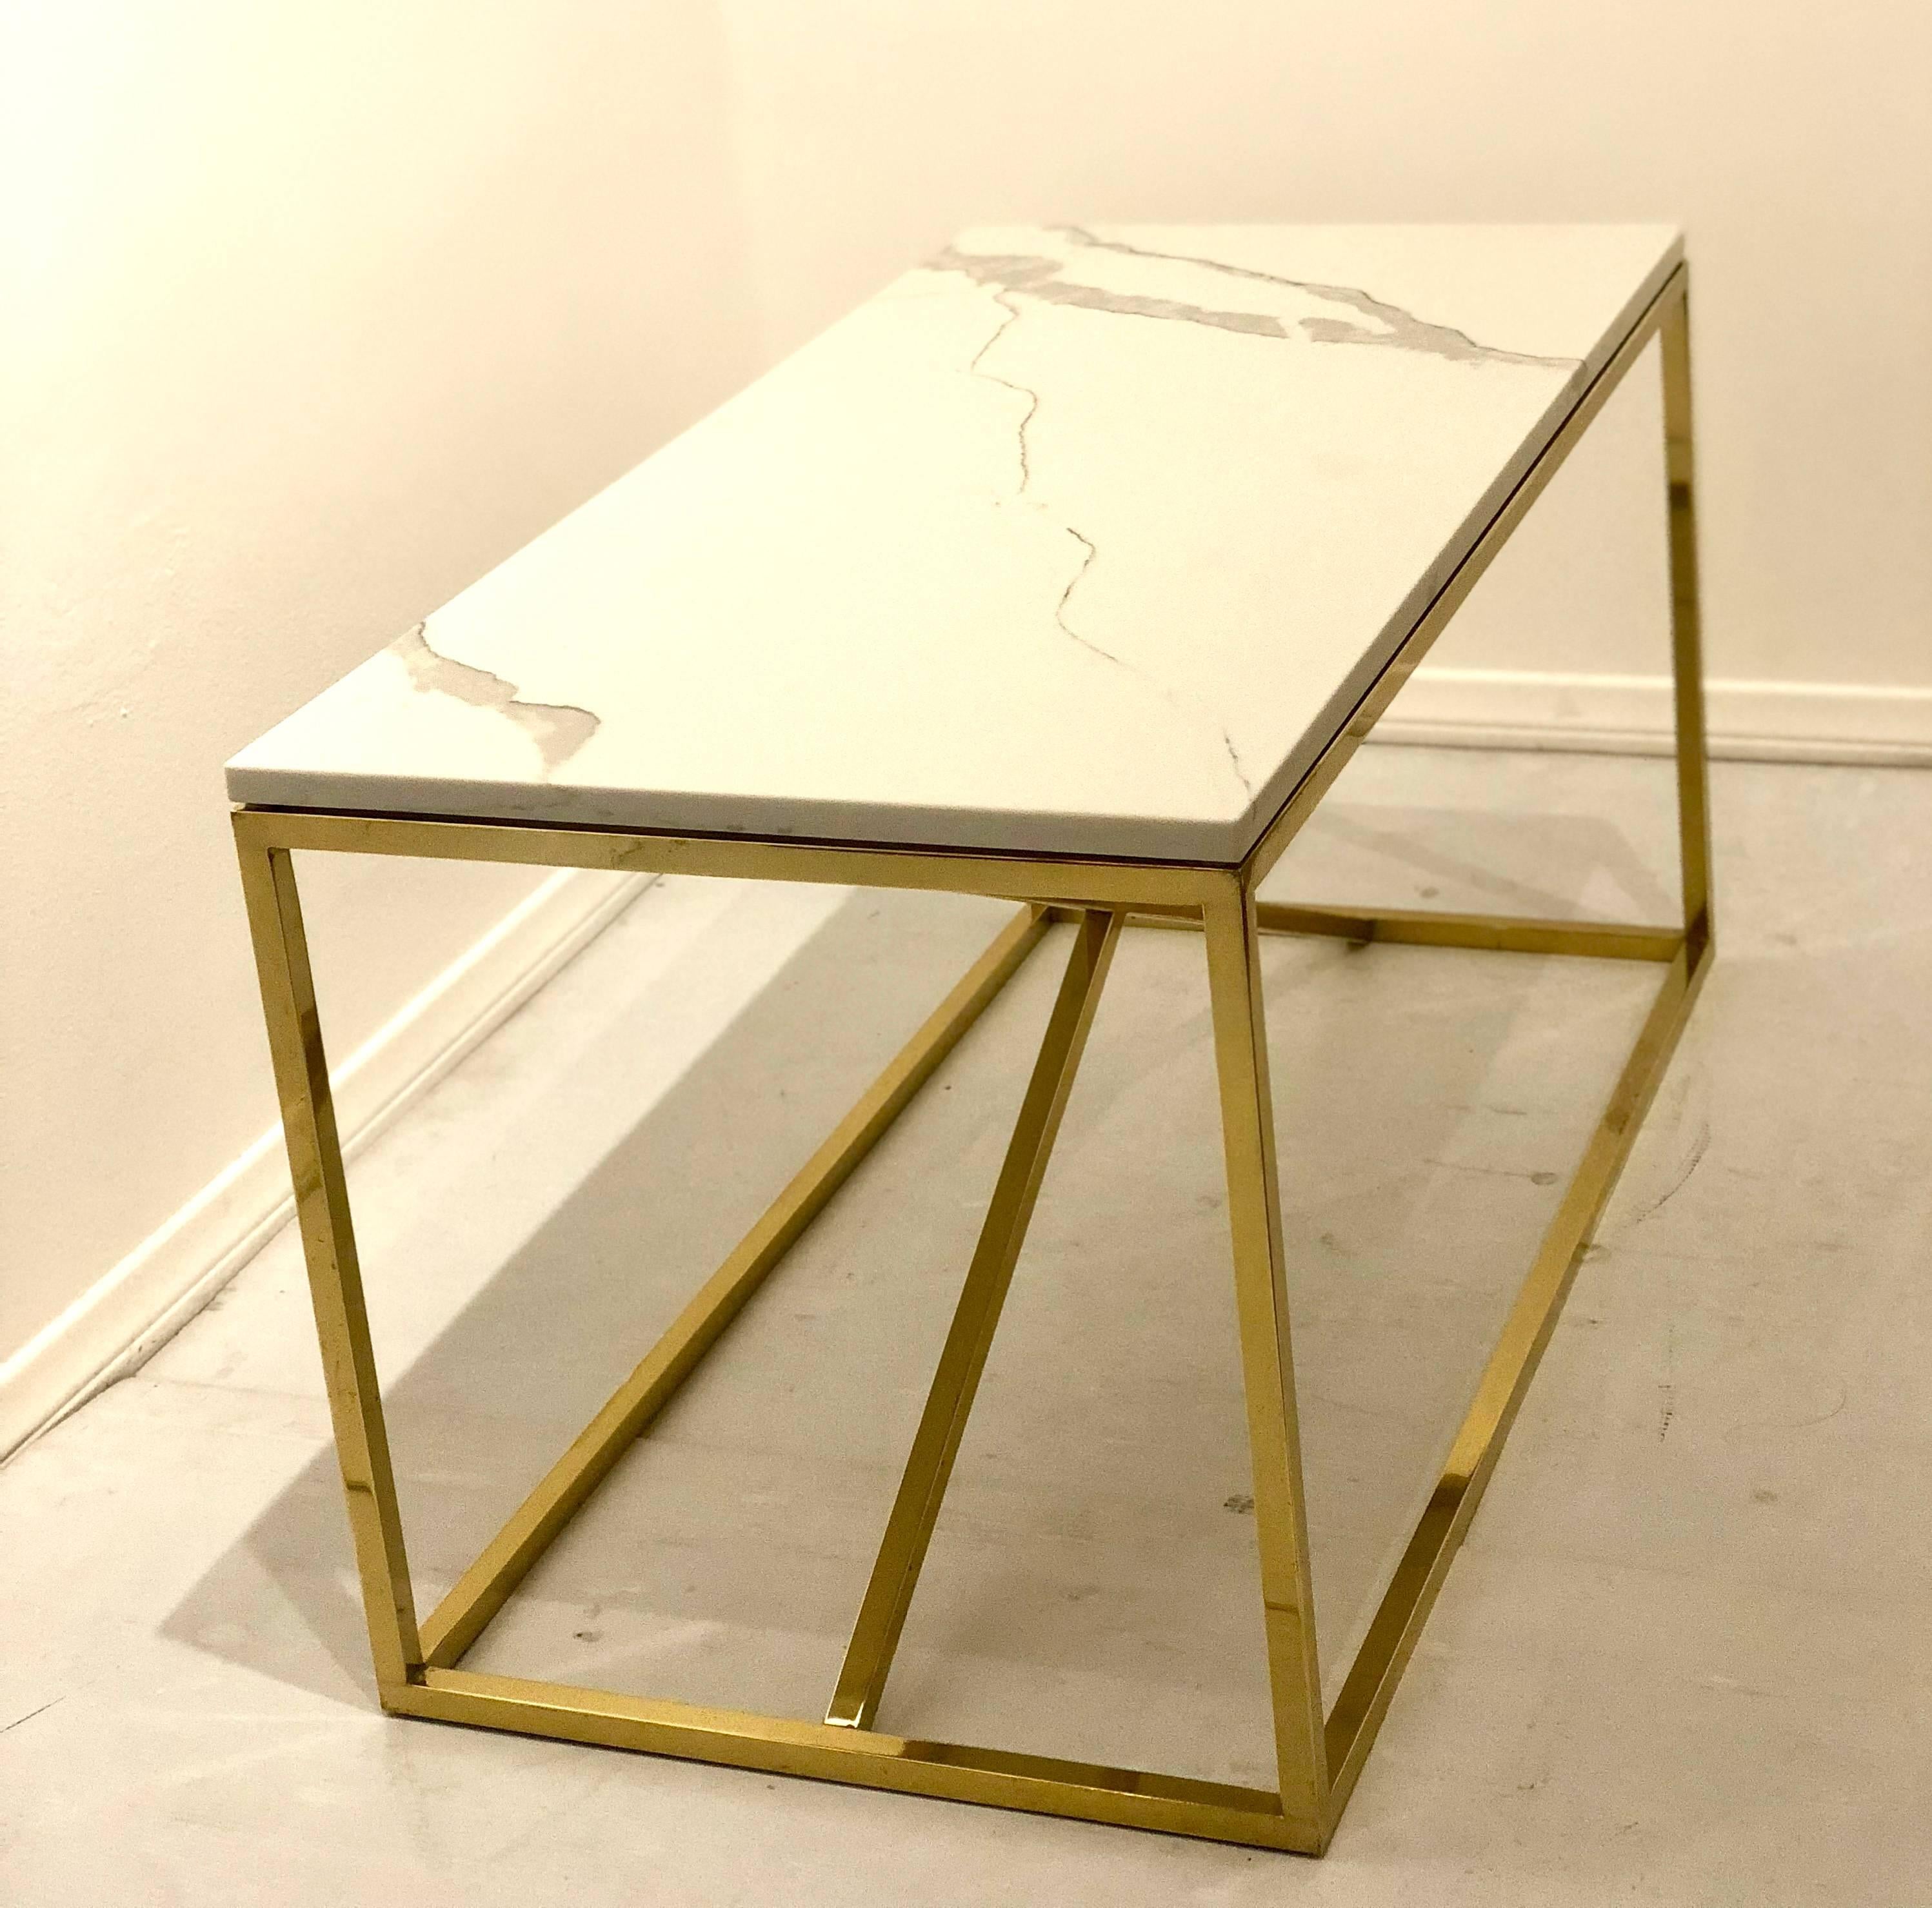 Striking Polished Brass and Marble Coffee Table x Base 1